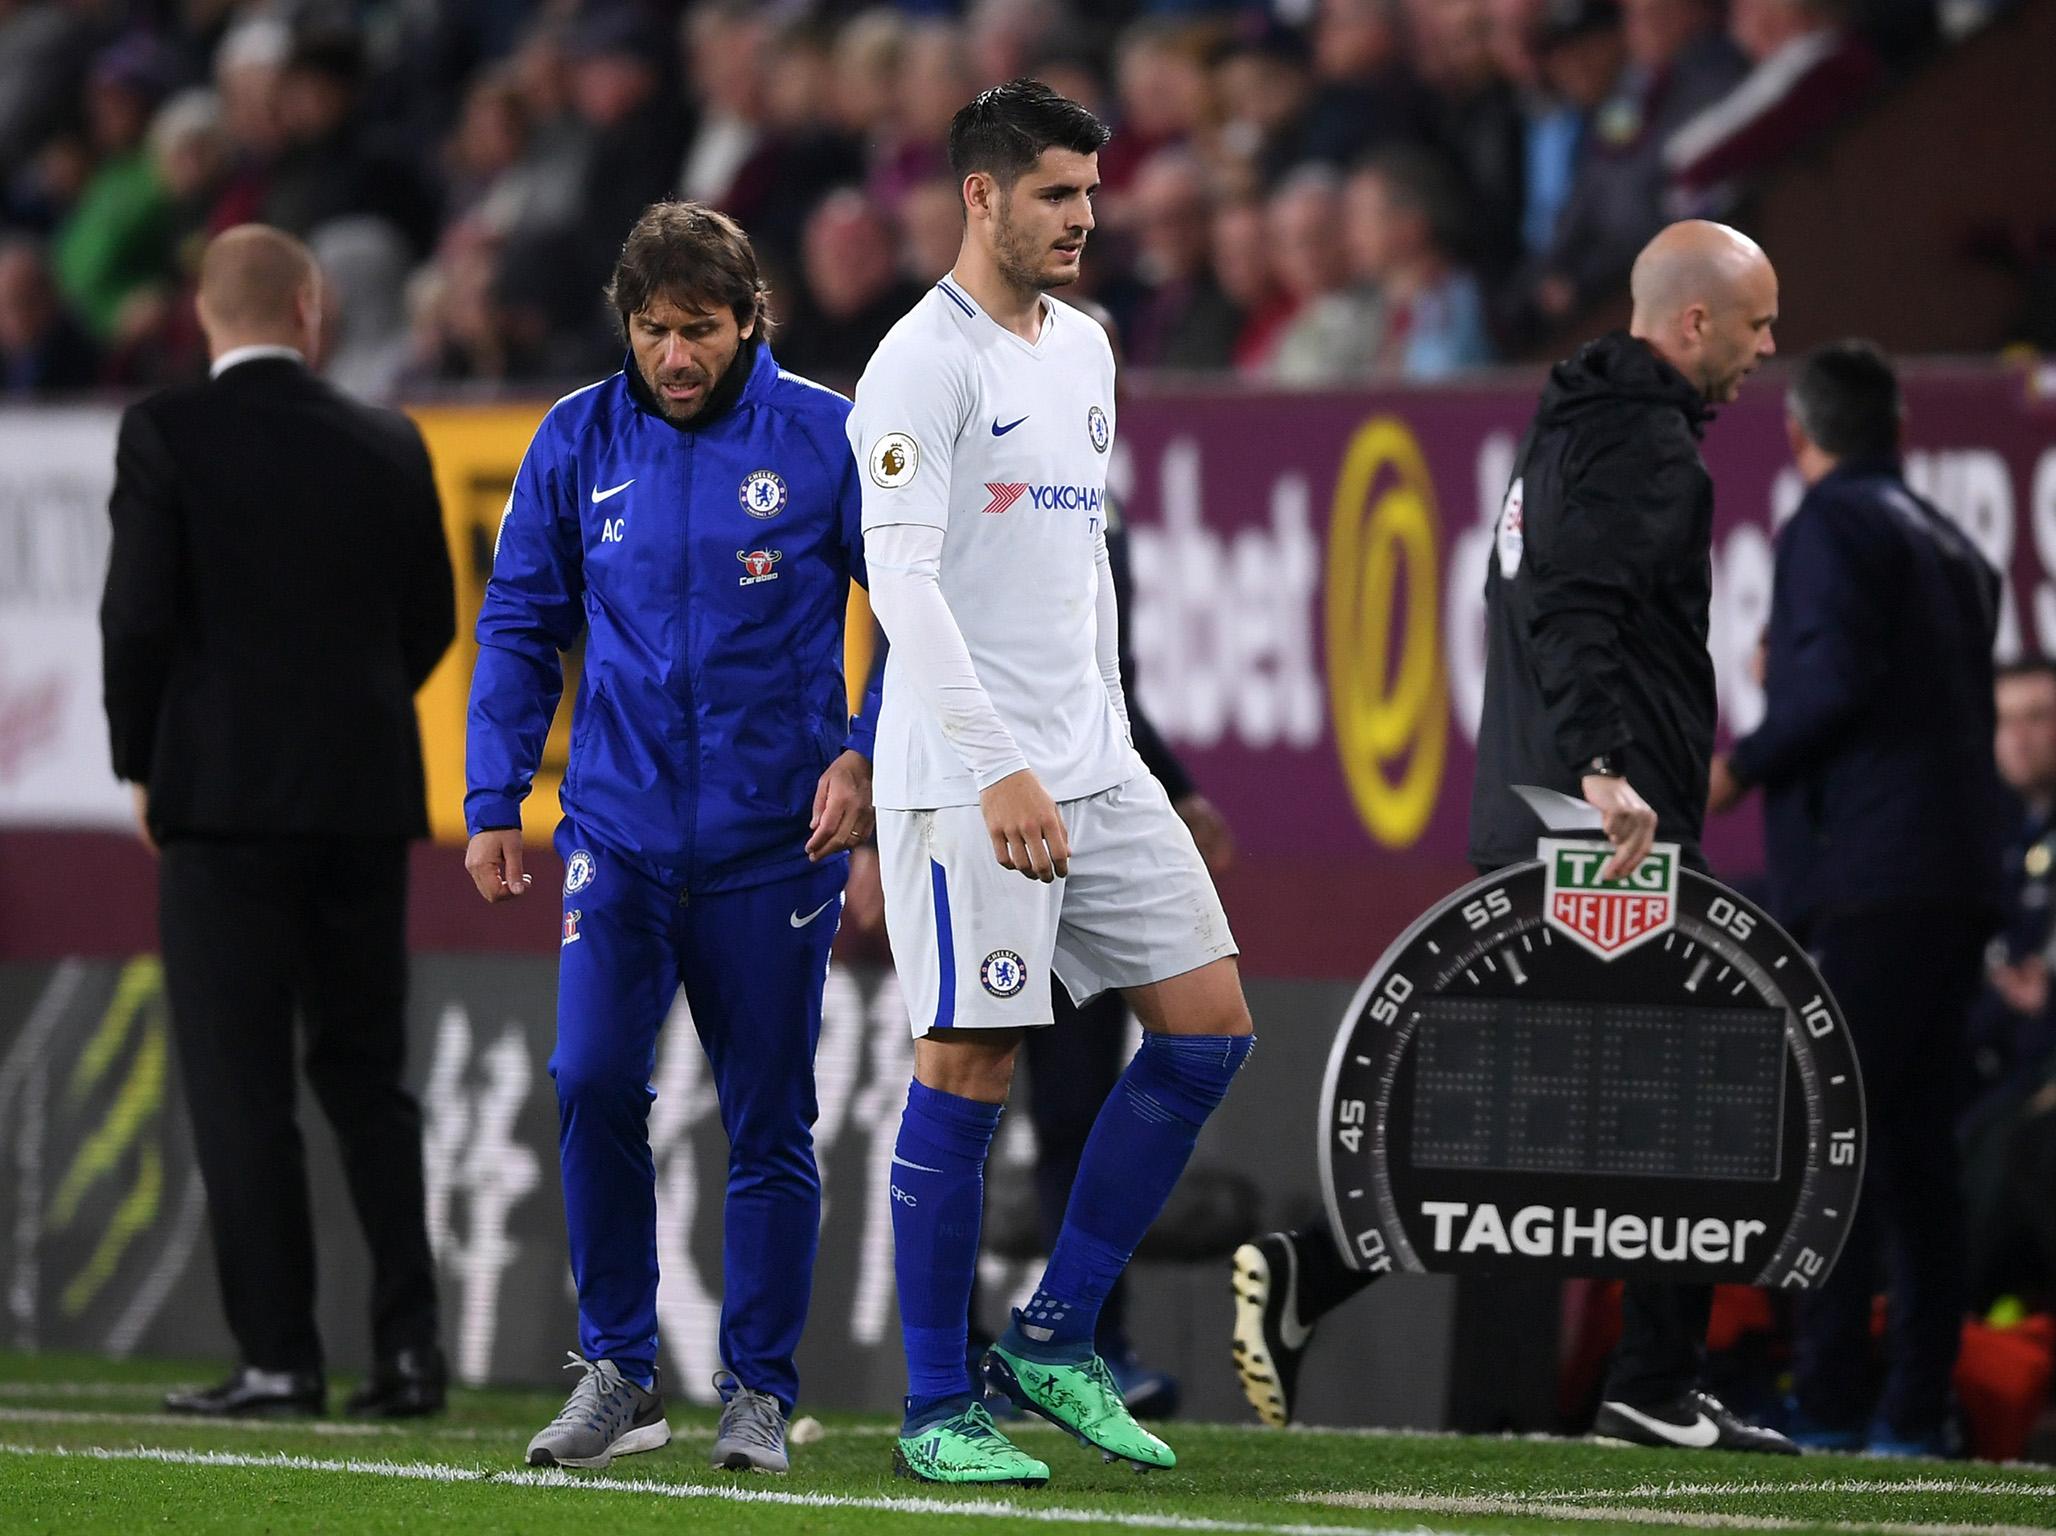 Alvaro Morata angry with himself, not me, insists Antonio Conte after striker shows fury during win over Burnley